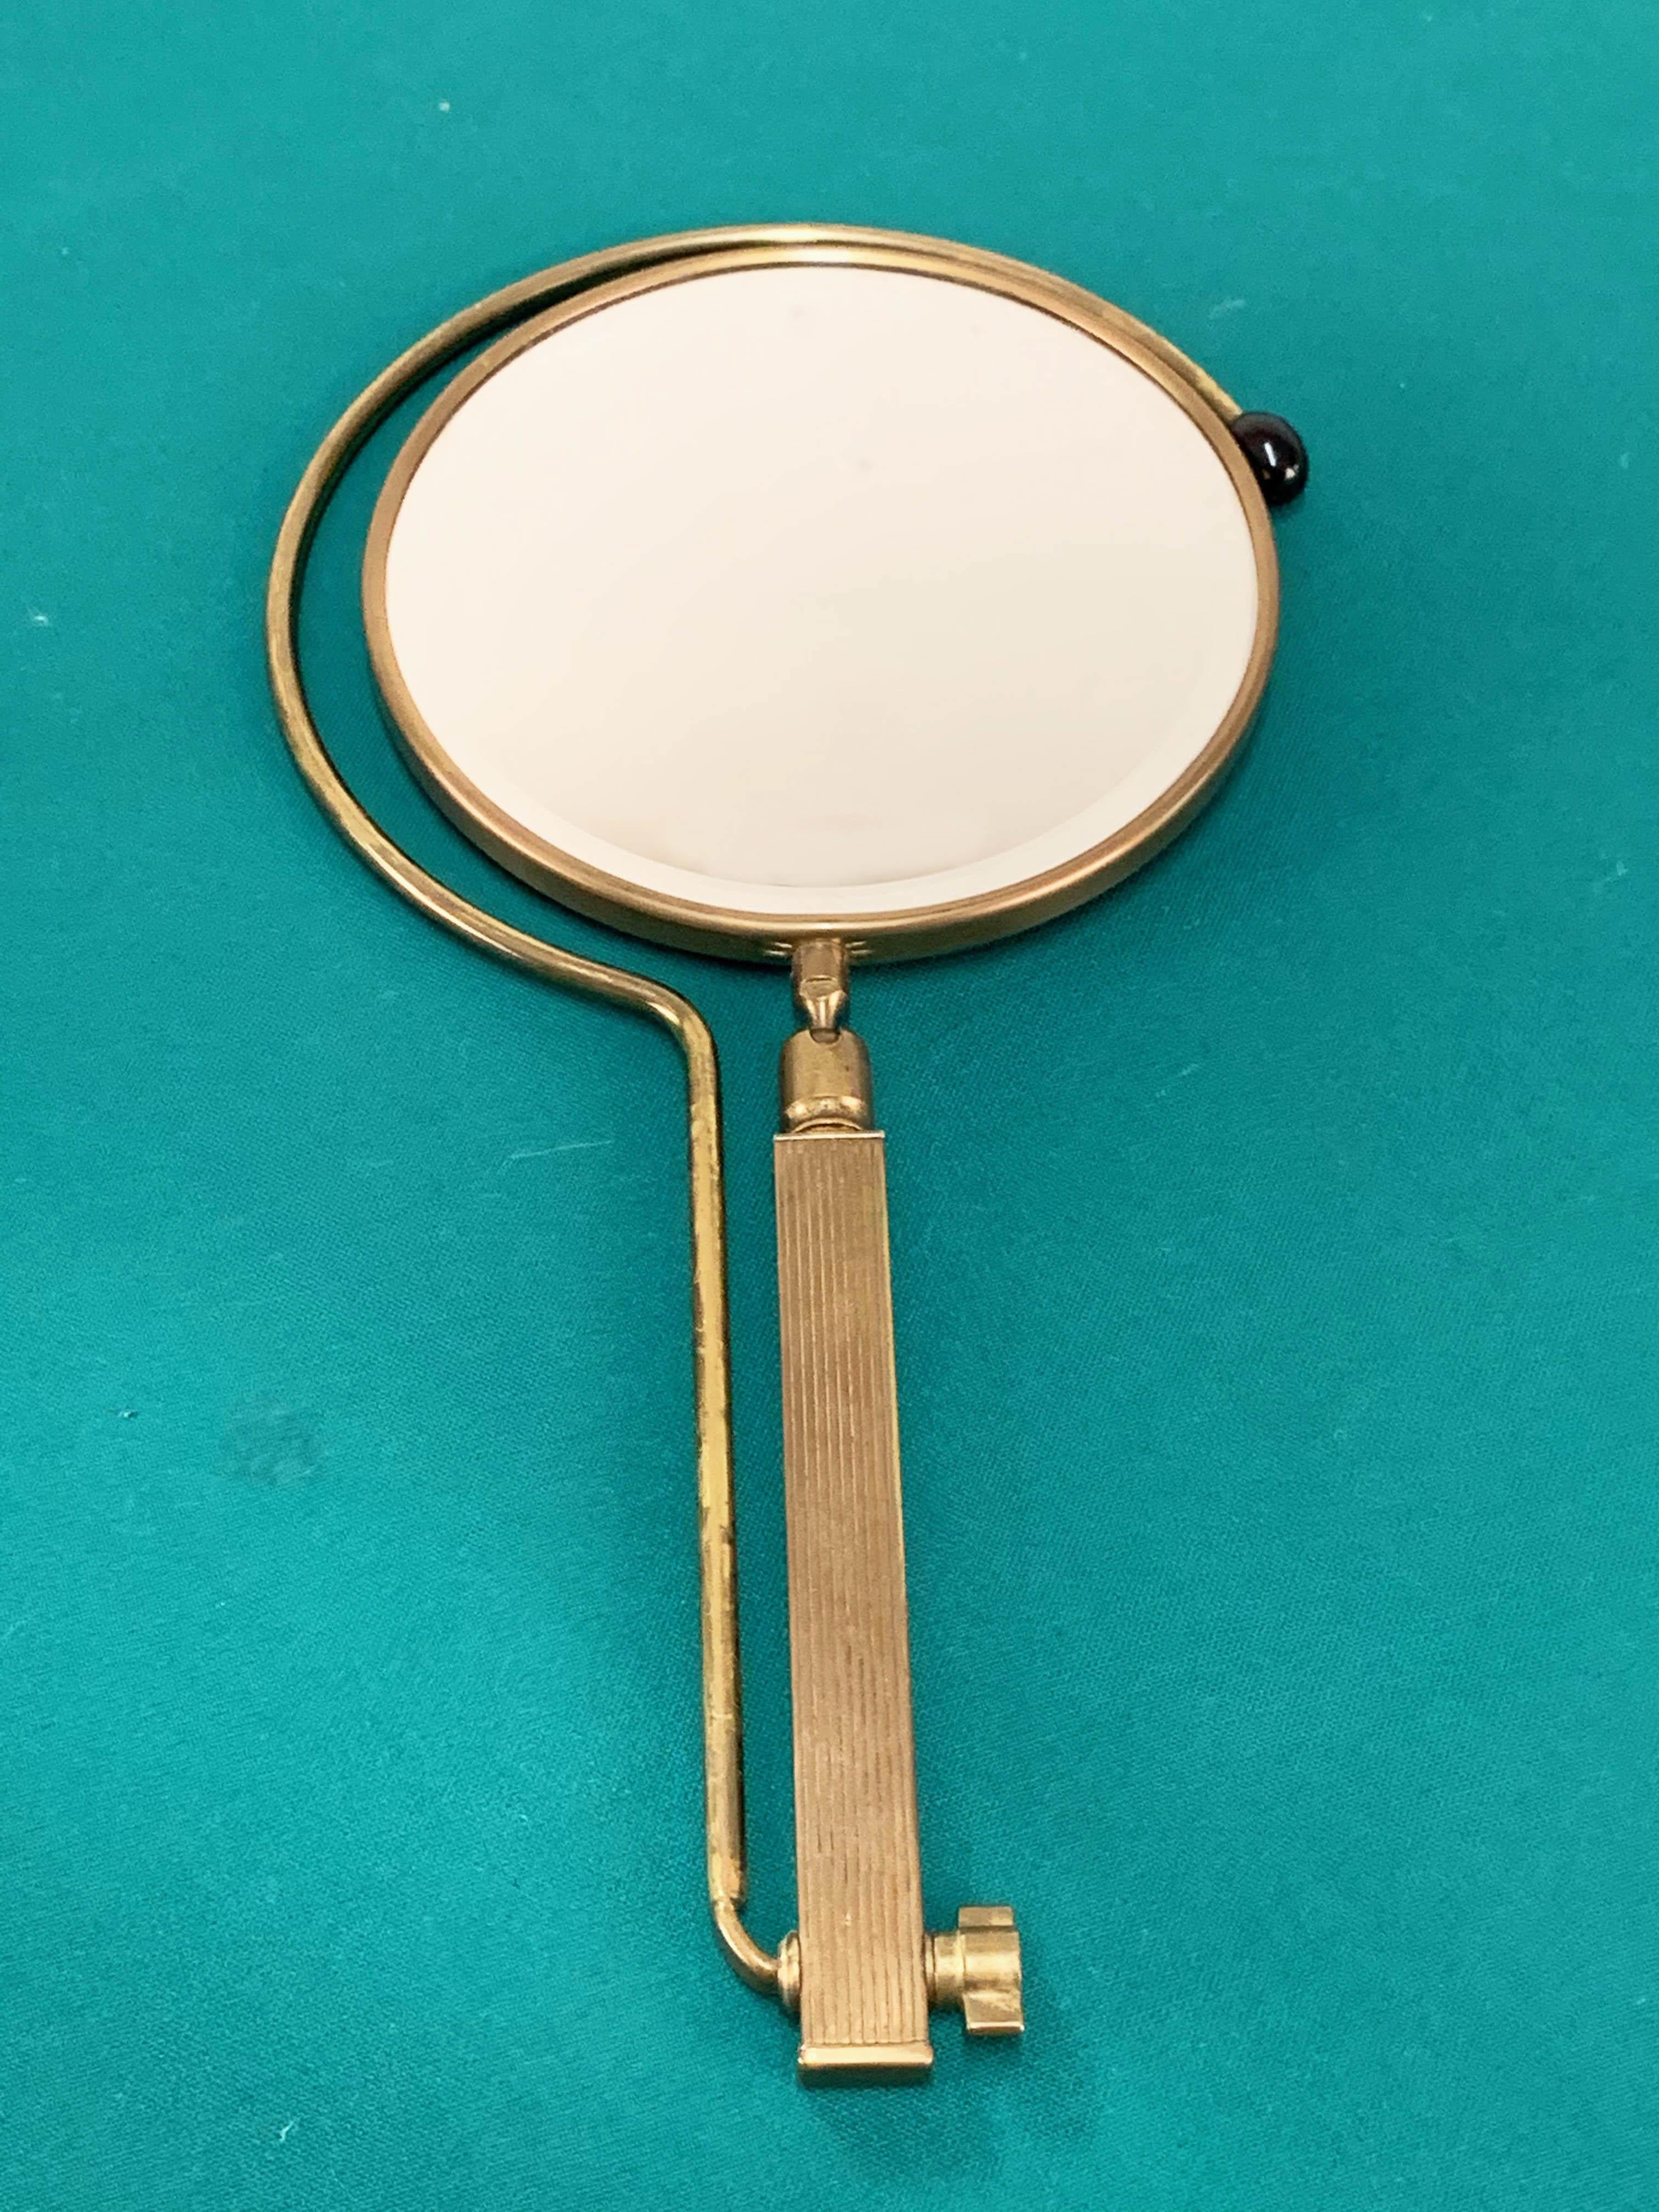 Midcentury Brass French Adjustable Table Mirror with a Two-Sides Stand, 1950s For Sale 3